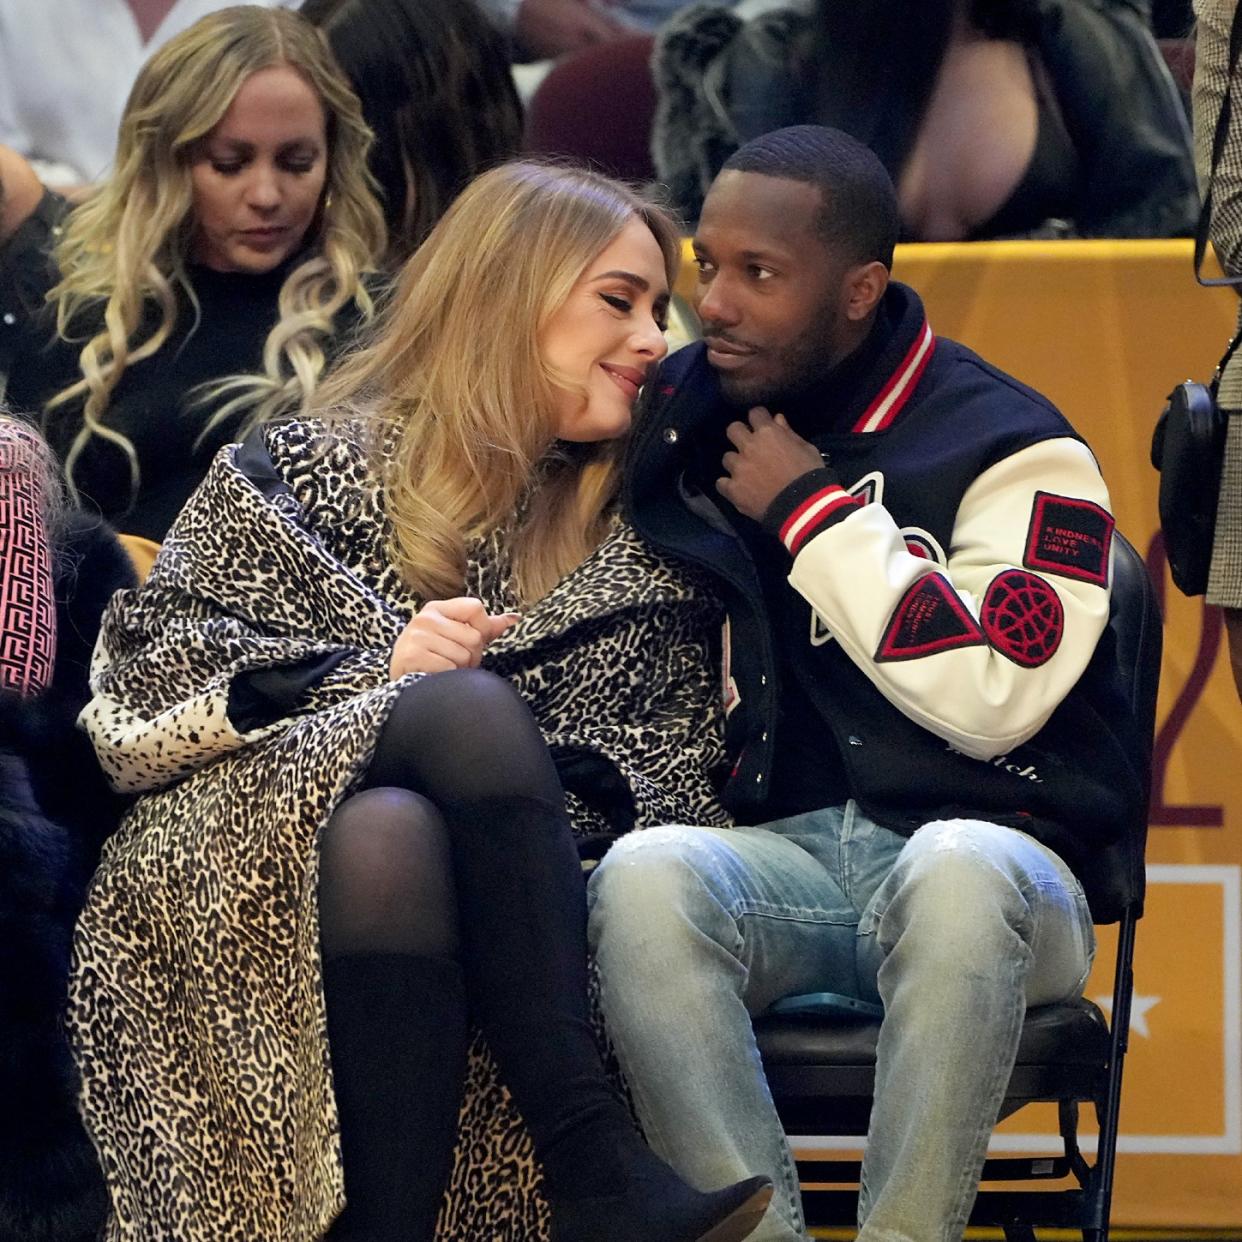  Adele and Rich Paul attend the 2022 NBA All-Star Game at Rocket Mortgage Fieldhouse on February 20, 2022 in Cleveland, Ohio 